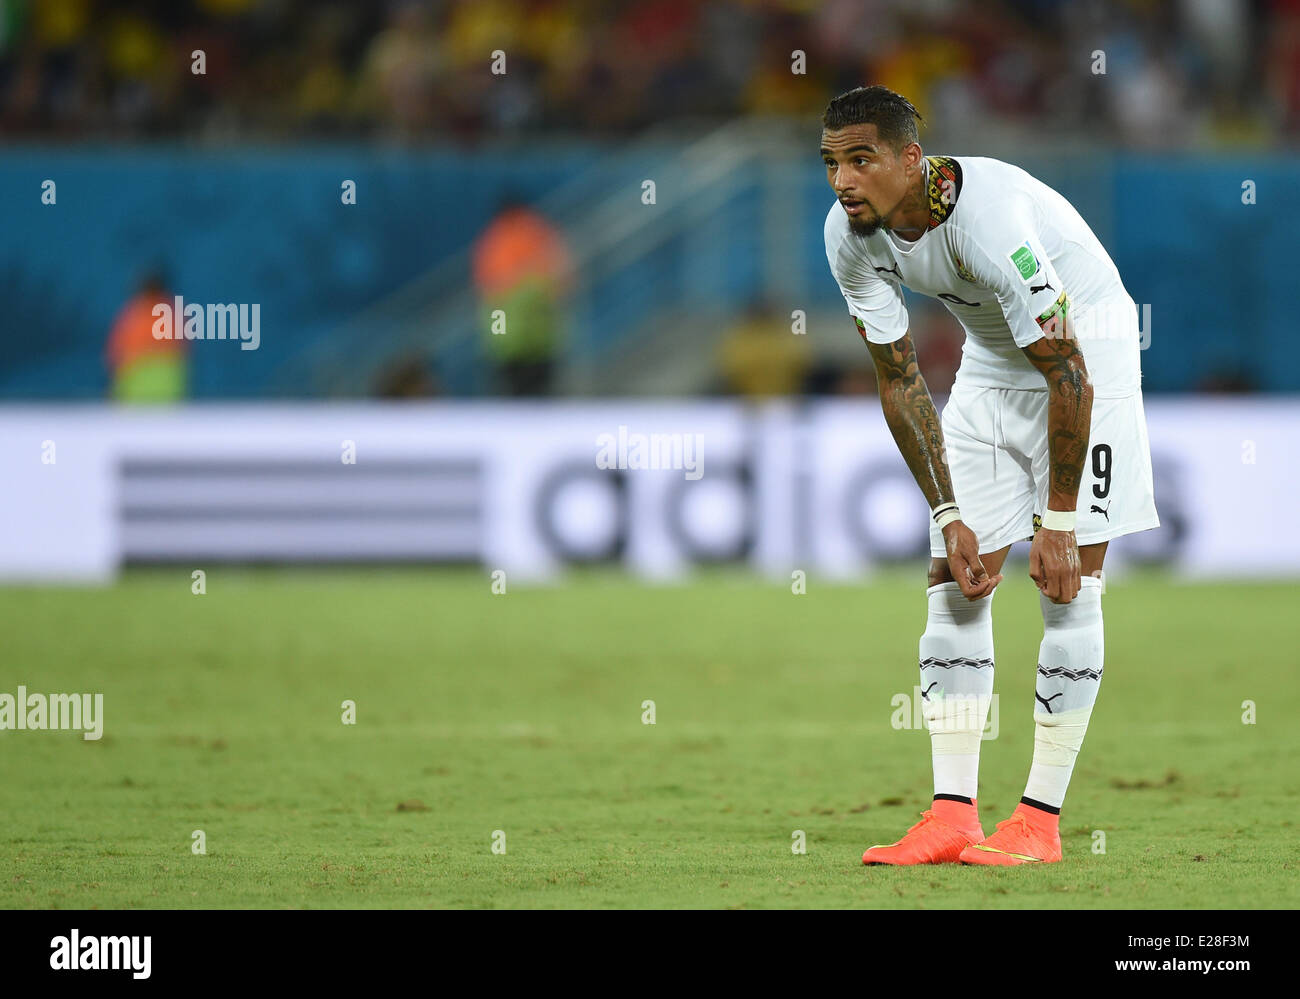 Natal, Brazil. 16th June, 2014. Kevin Prince Boateng of Ghana reacts during the FIFA World Cup 2014 group G preliminary round match between Ghana and the USA at the Estadio Arena das Dunas Stadium in Natal, Brazil, 16 June 2014. Credit:  dpa picture alliance/Alamy Live News Stock Photo